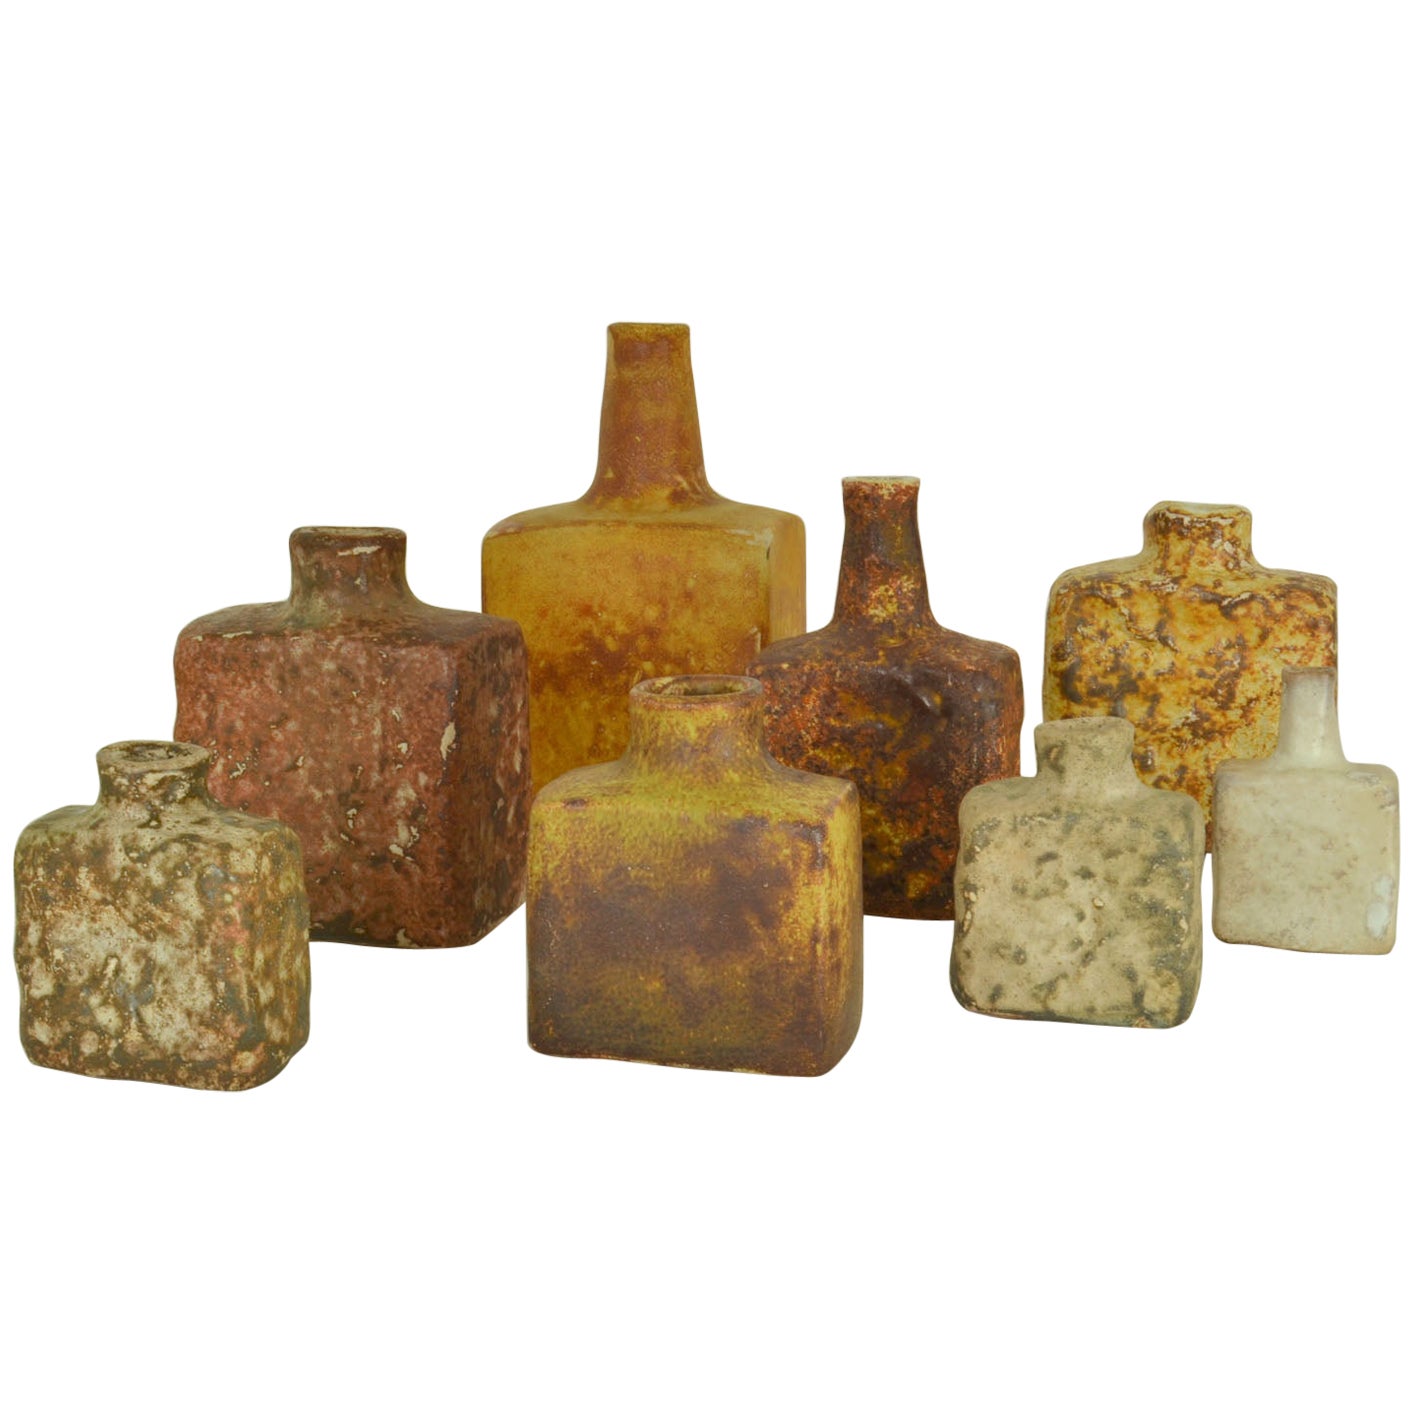 Group of 1960's Square Studio Ceramic Vases in Ocher and Earth Tones For Sale